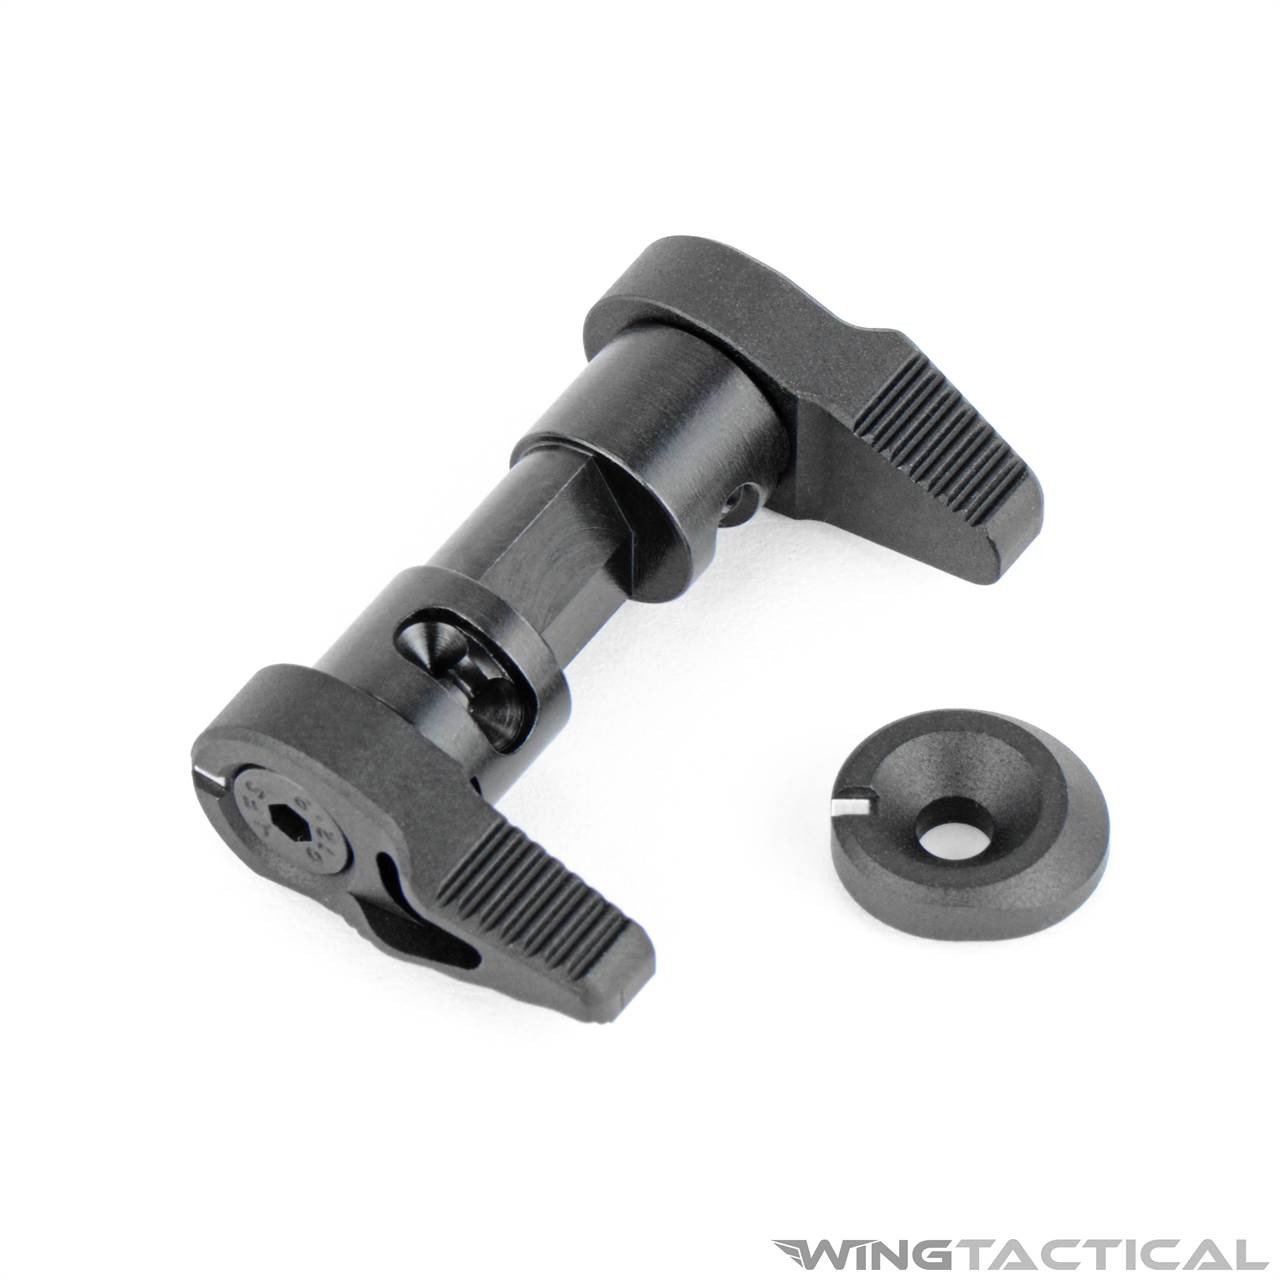 Strike Industries Flip Switch Ambidextrous Safety Selector | Wing Tactical